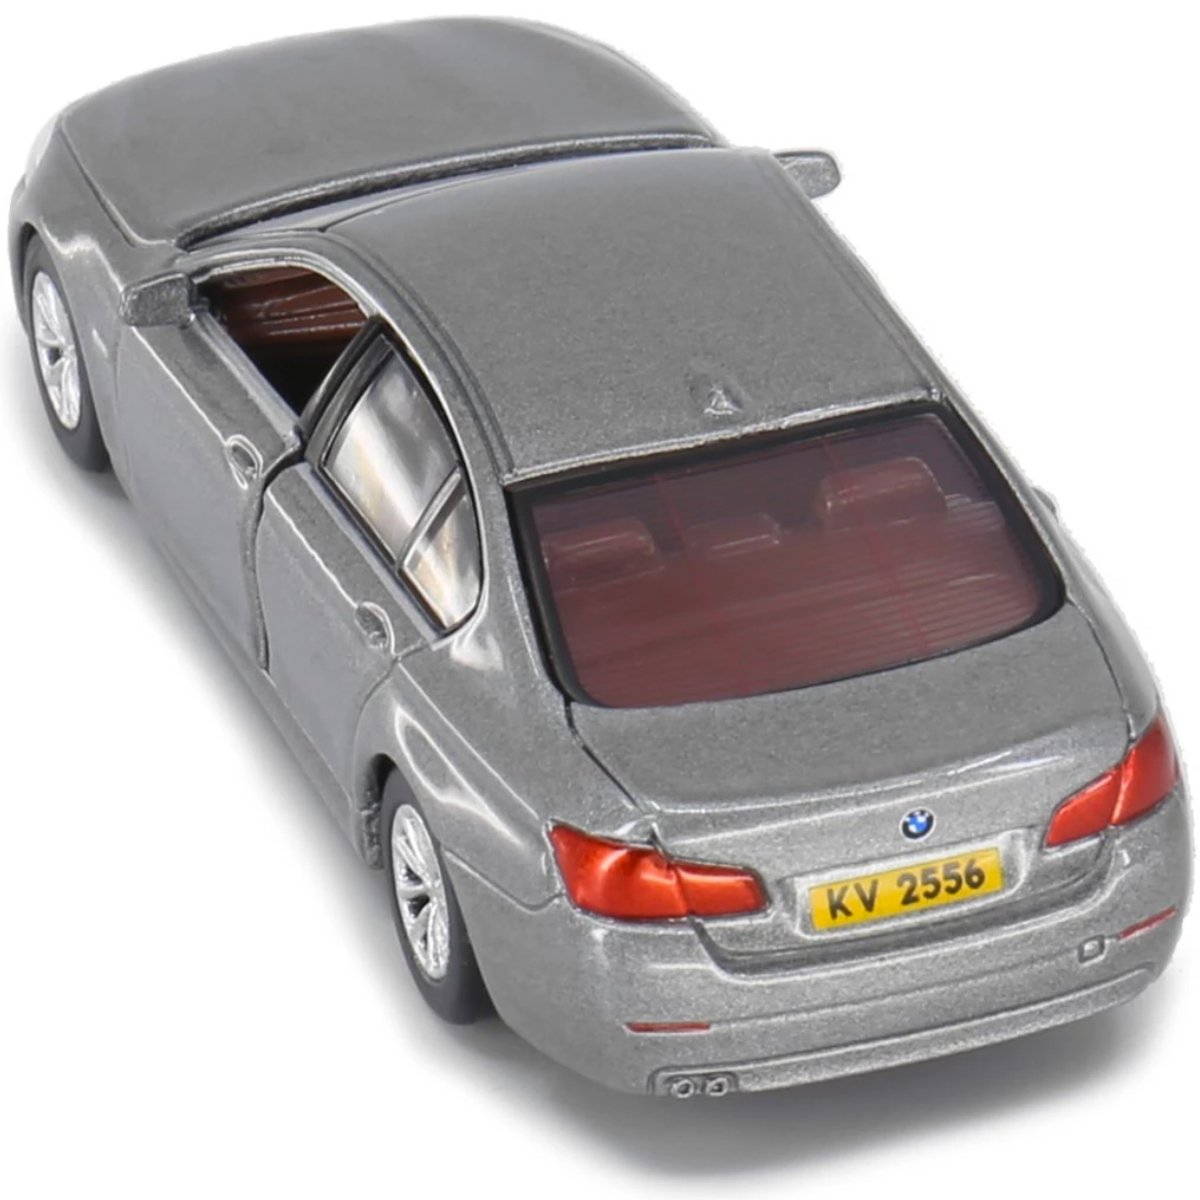 Tiny Models BMW 5 Series F10 Grey (1:64 Scale) - Phillips Hobbies